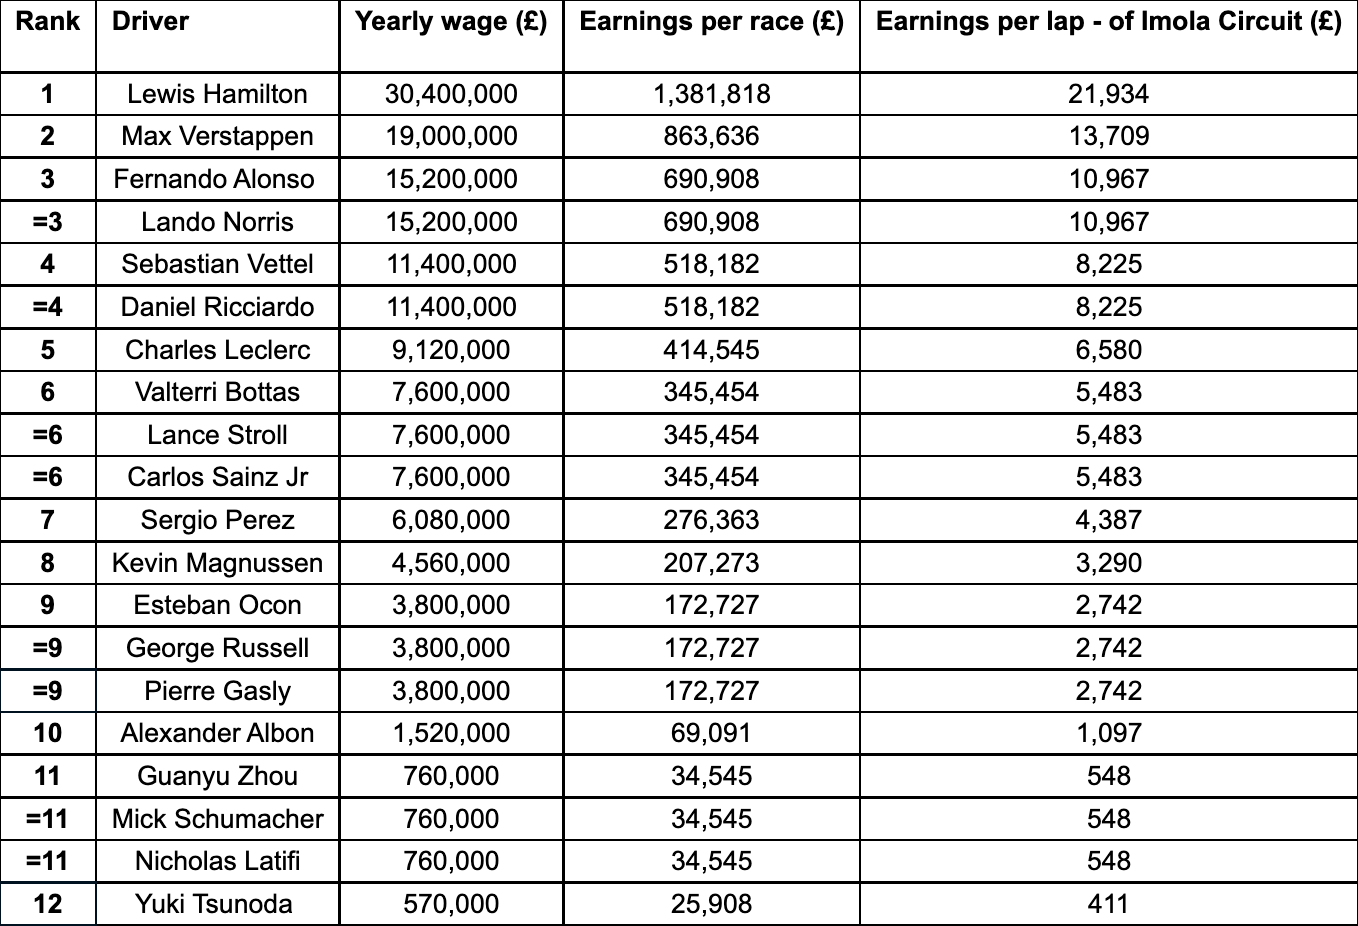 Every Formula 1 driver has been ranked by how much money they earn per lap